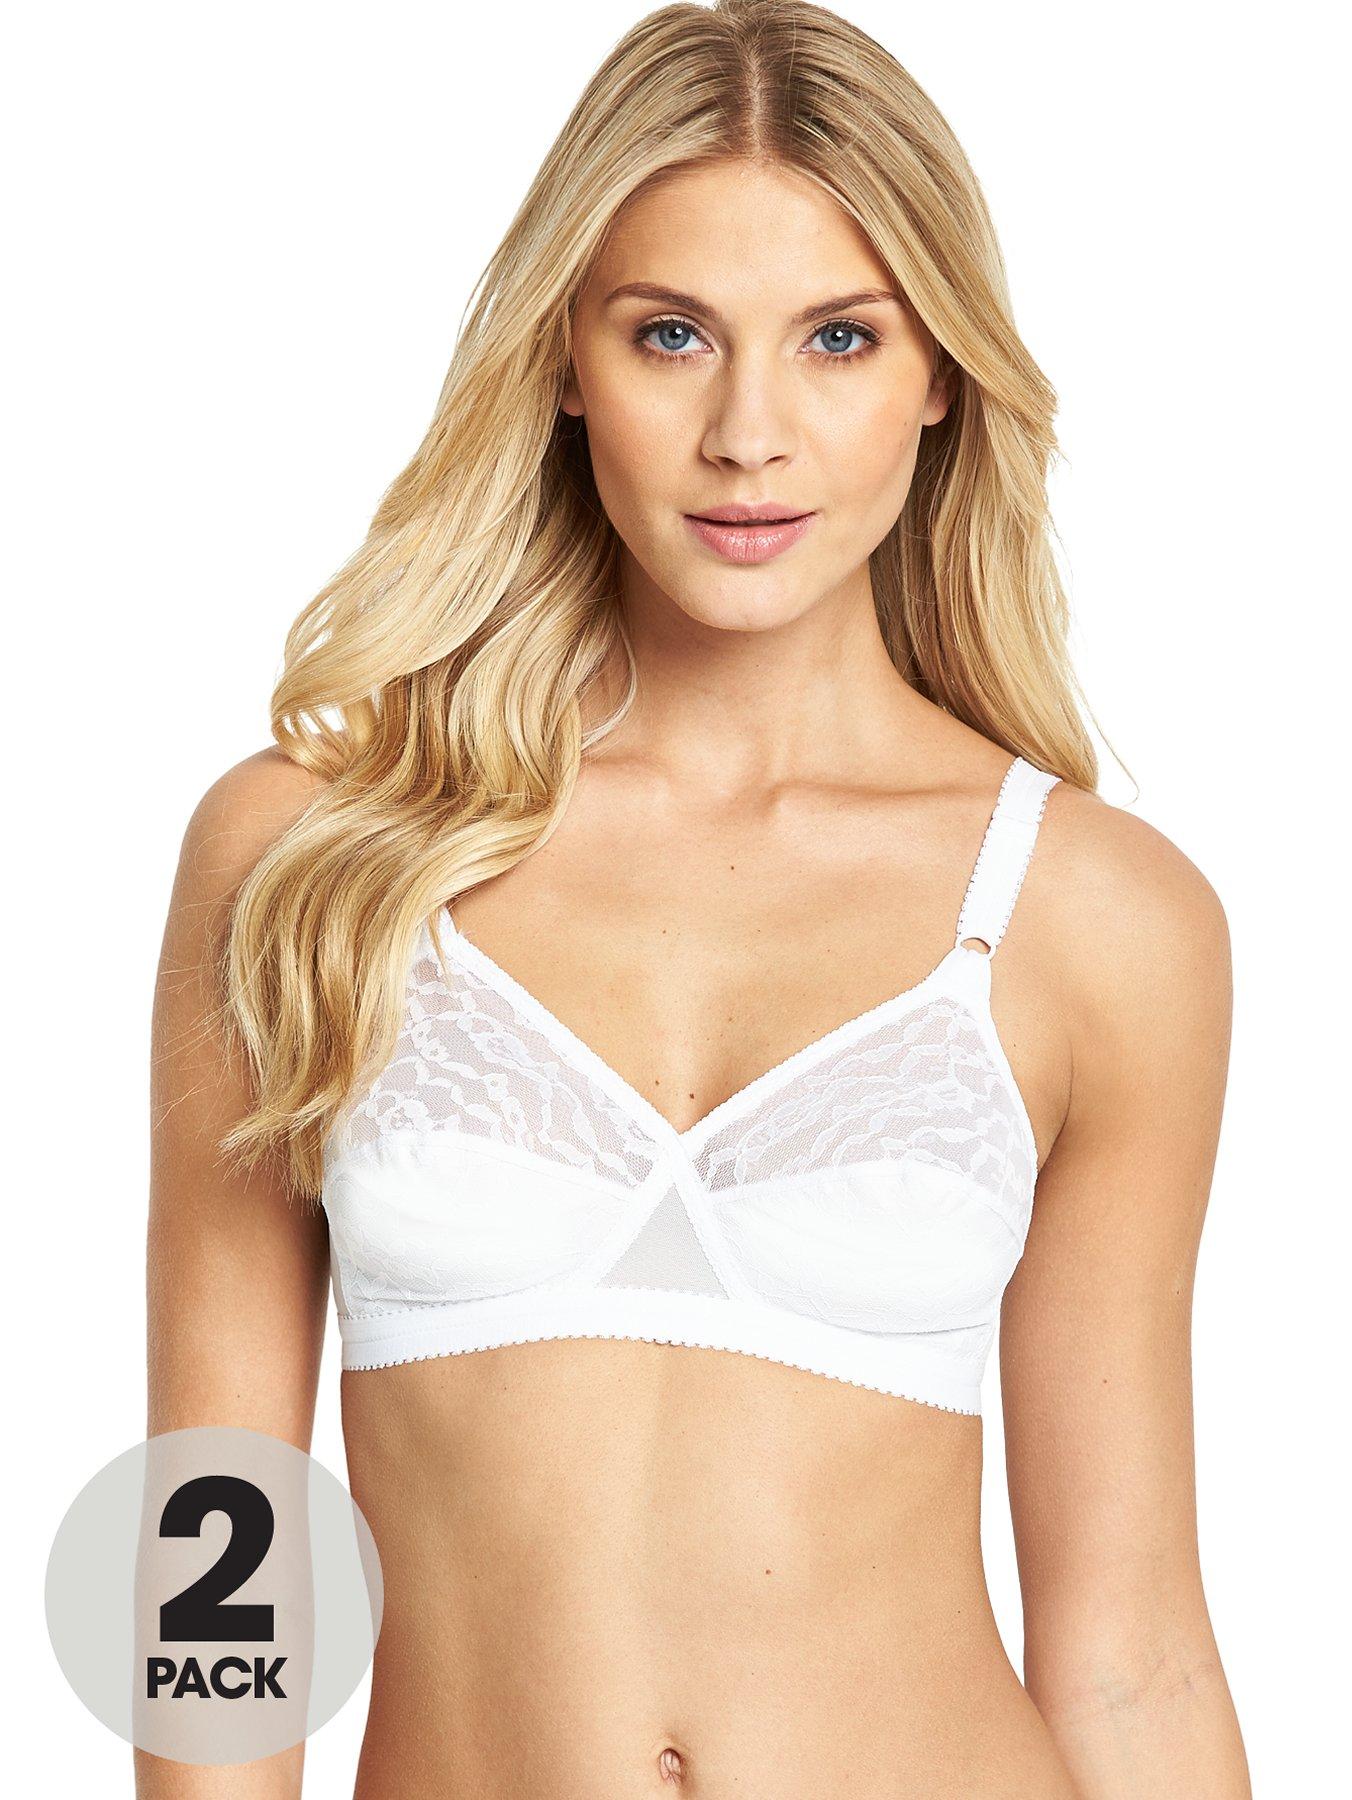 Buy Cross Your Heart Bra - Fast UK Delivery